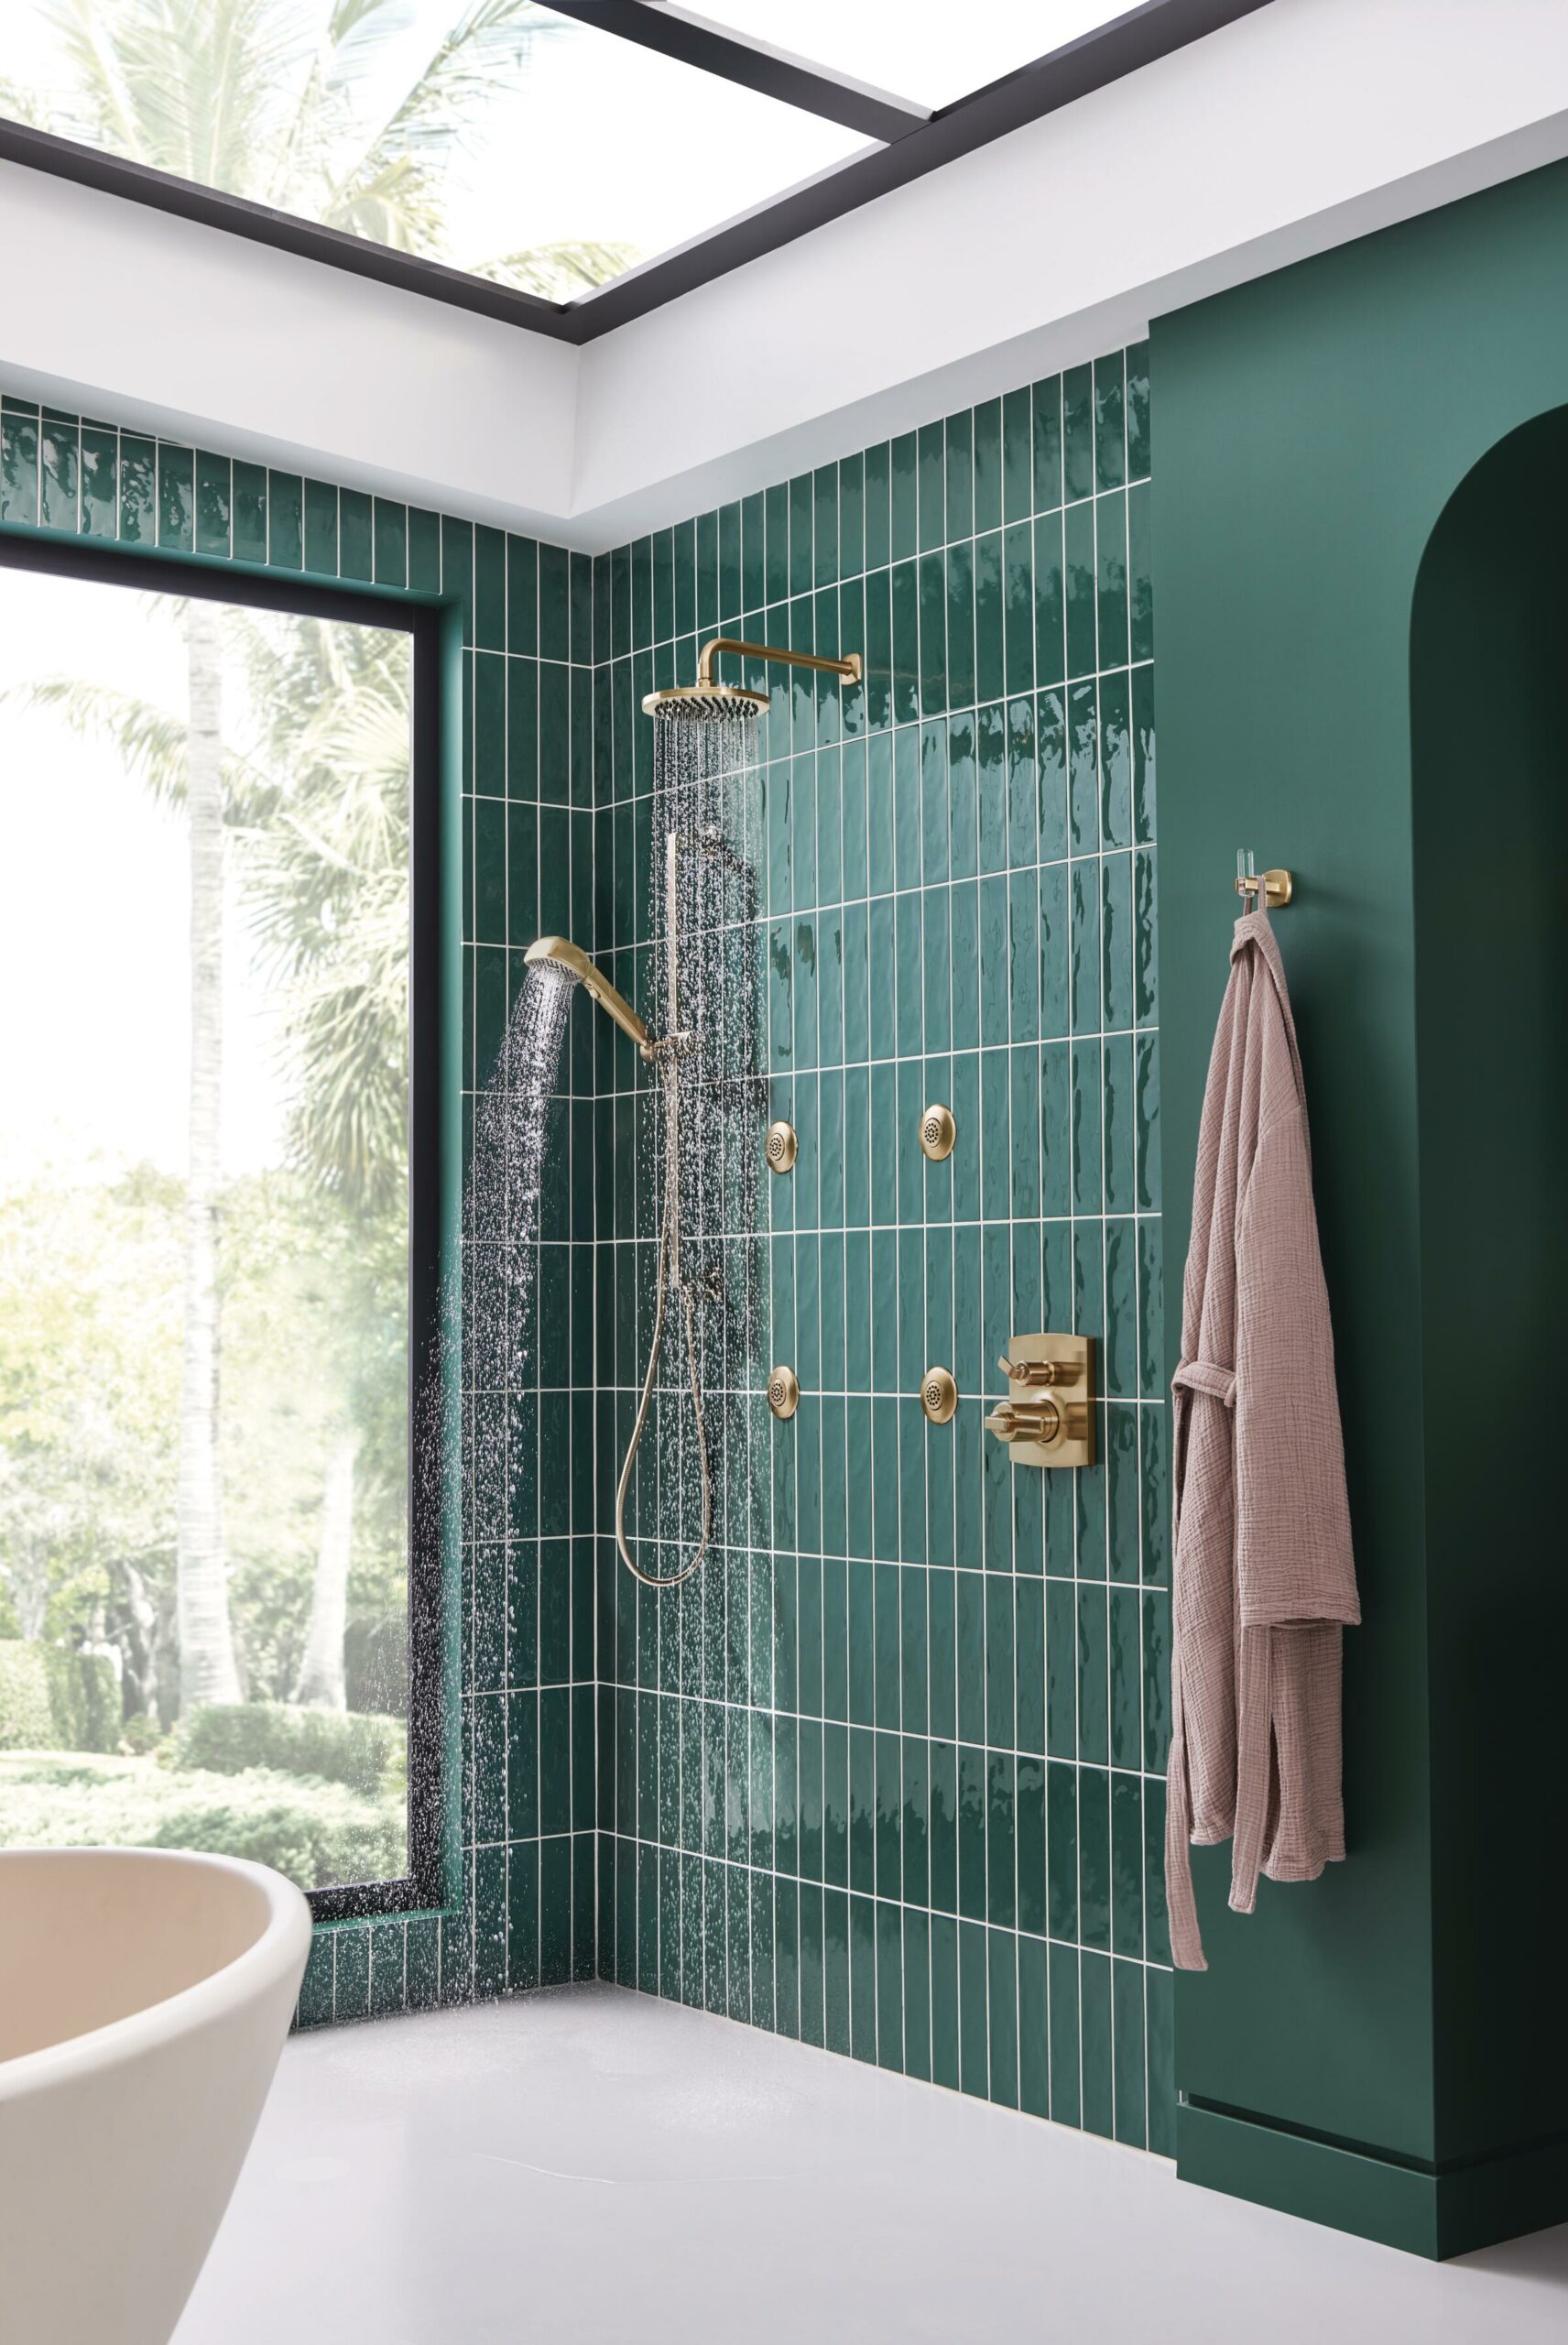 Water efficient shower in brushed gold in a green tiled luxury bath design.